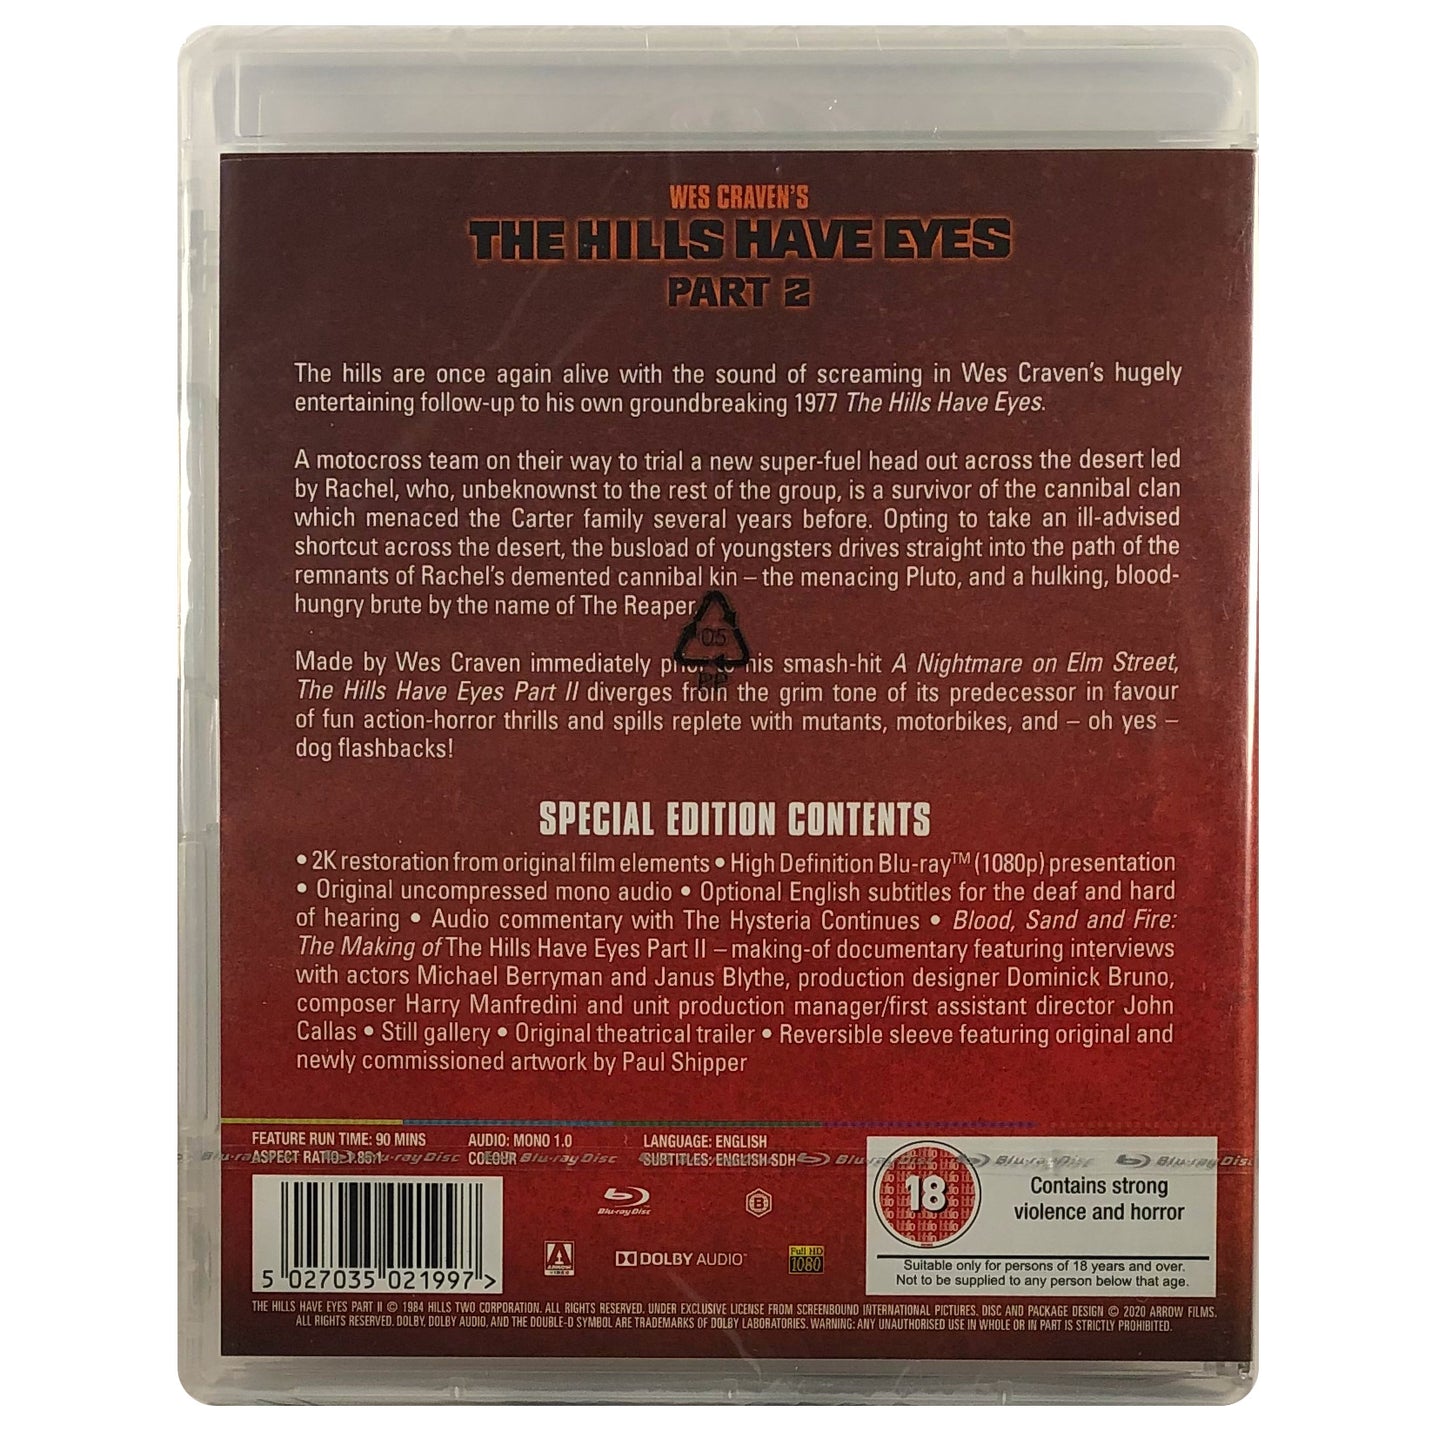 The Hills Have Eyes Part 2 Blu-Ray